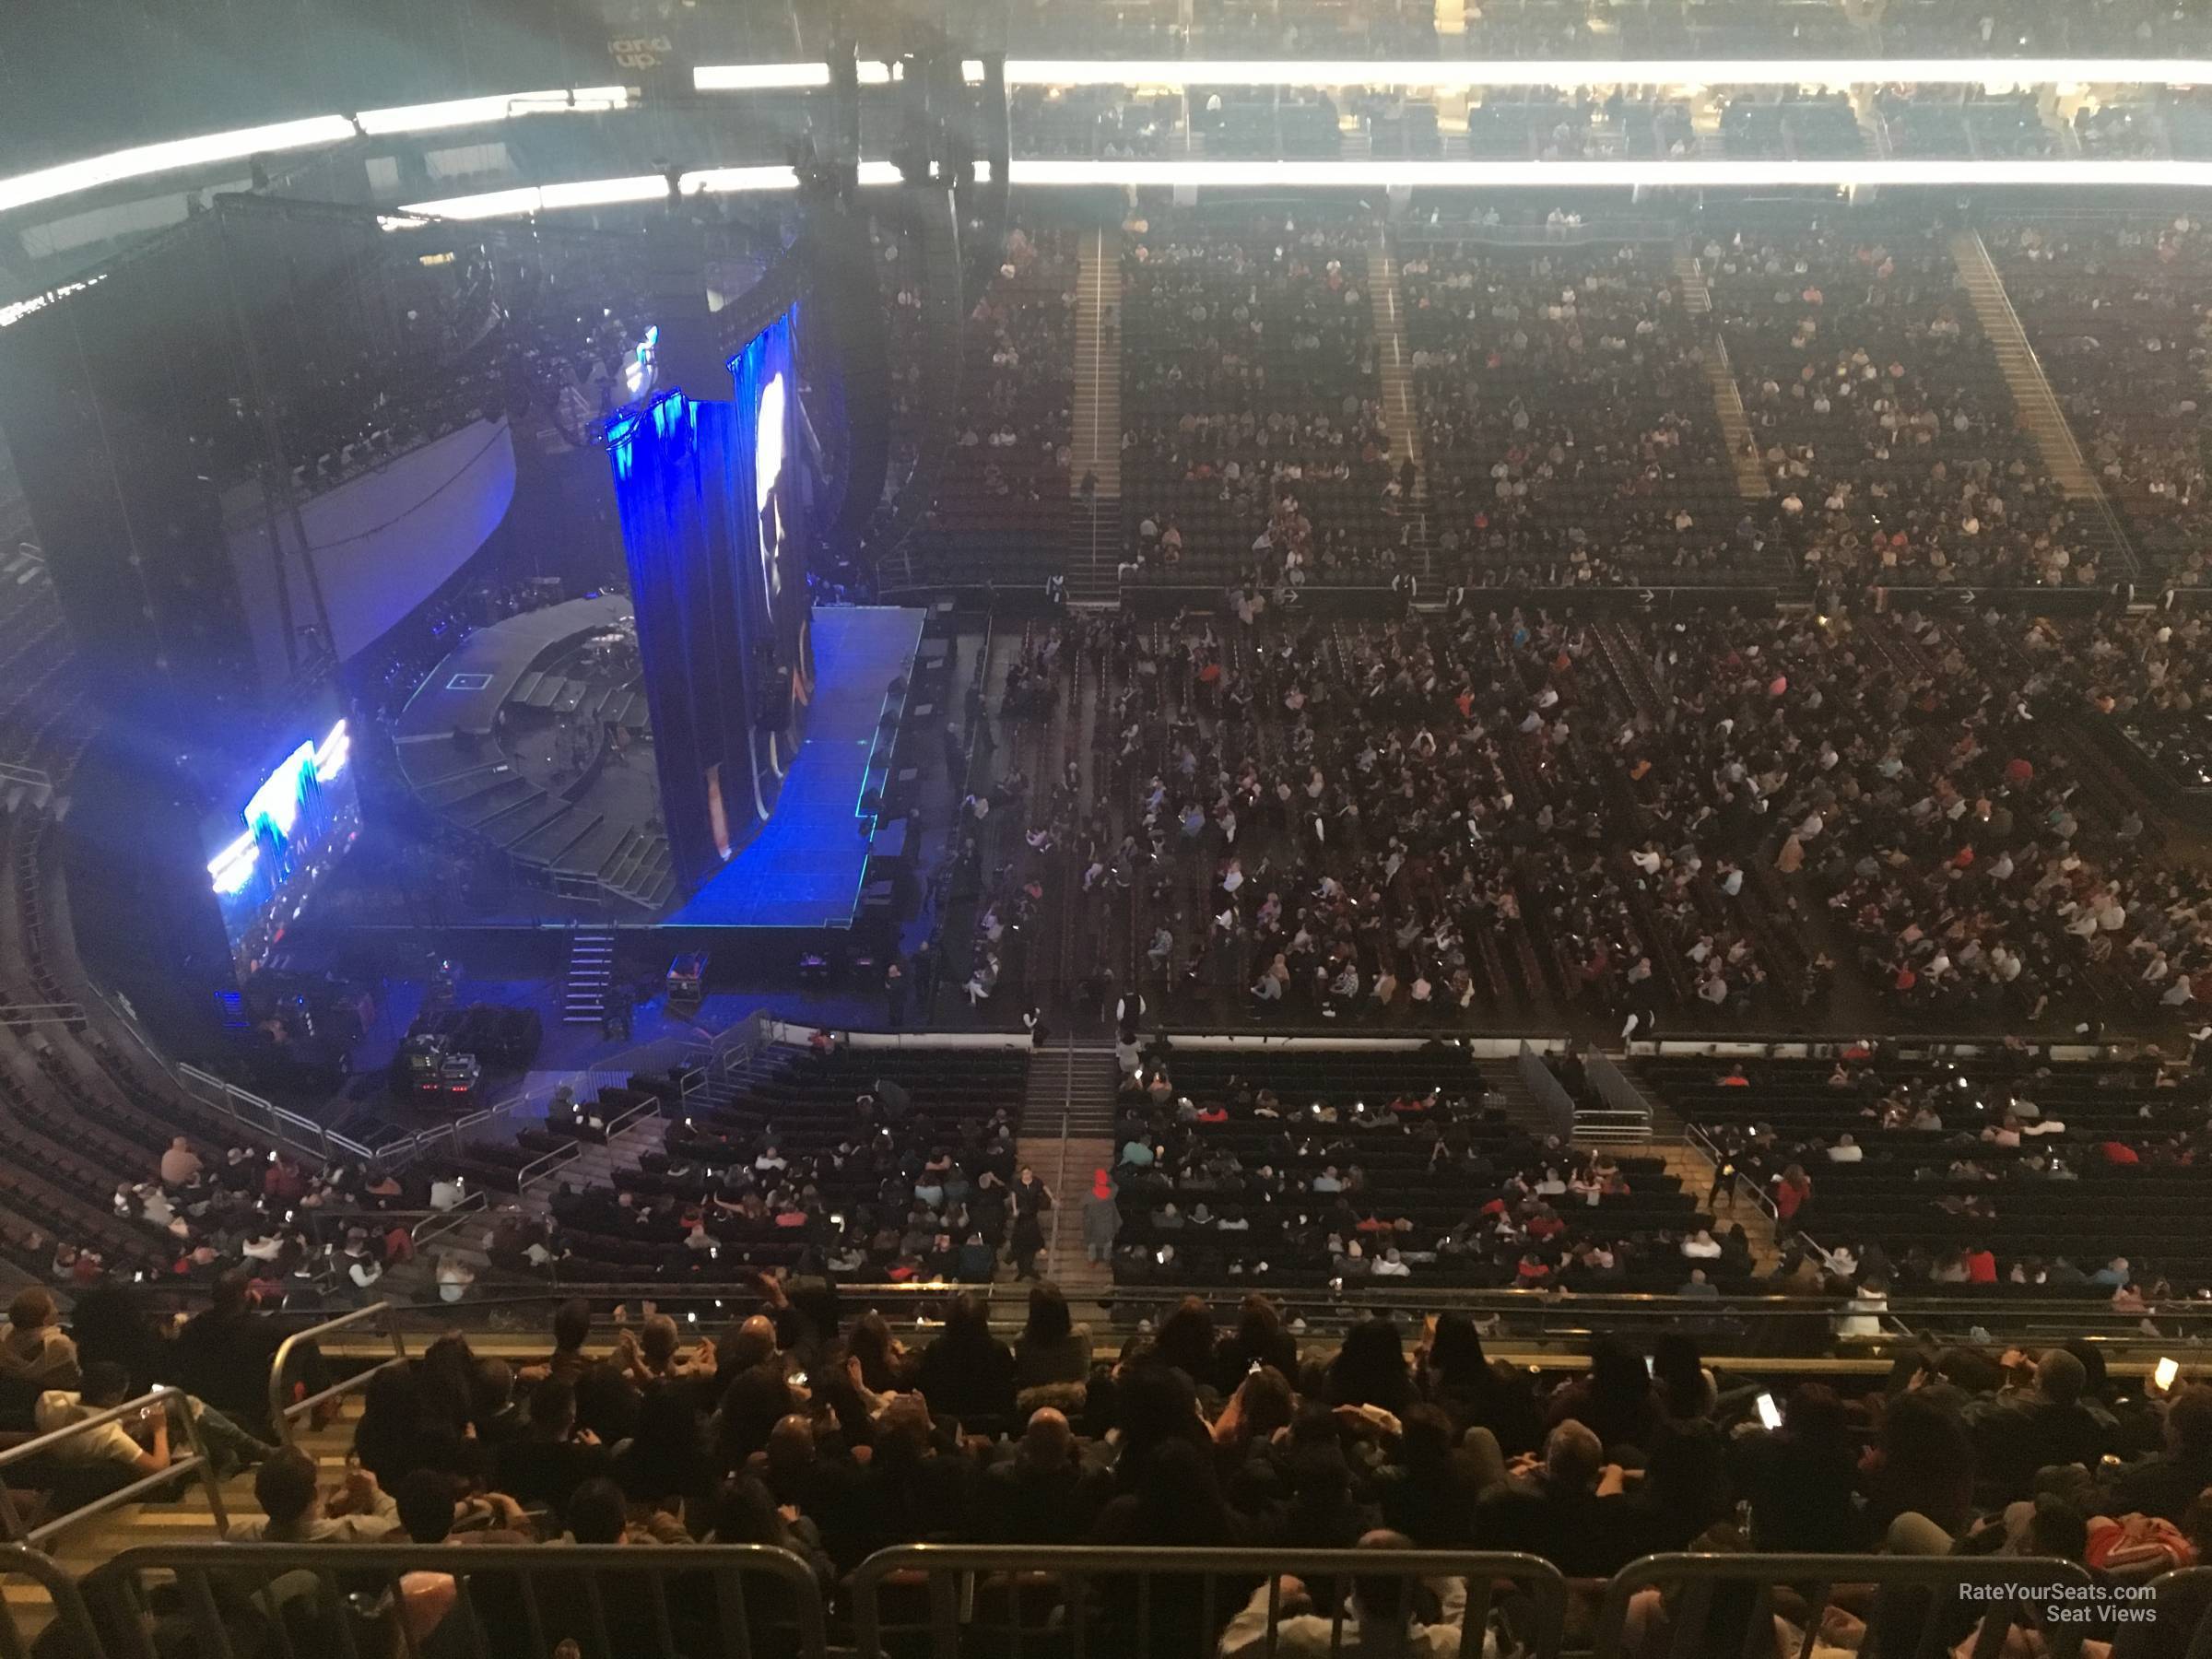 section 228, row 4 seat view  for concert - prudential center